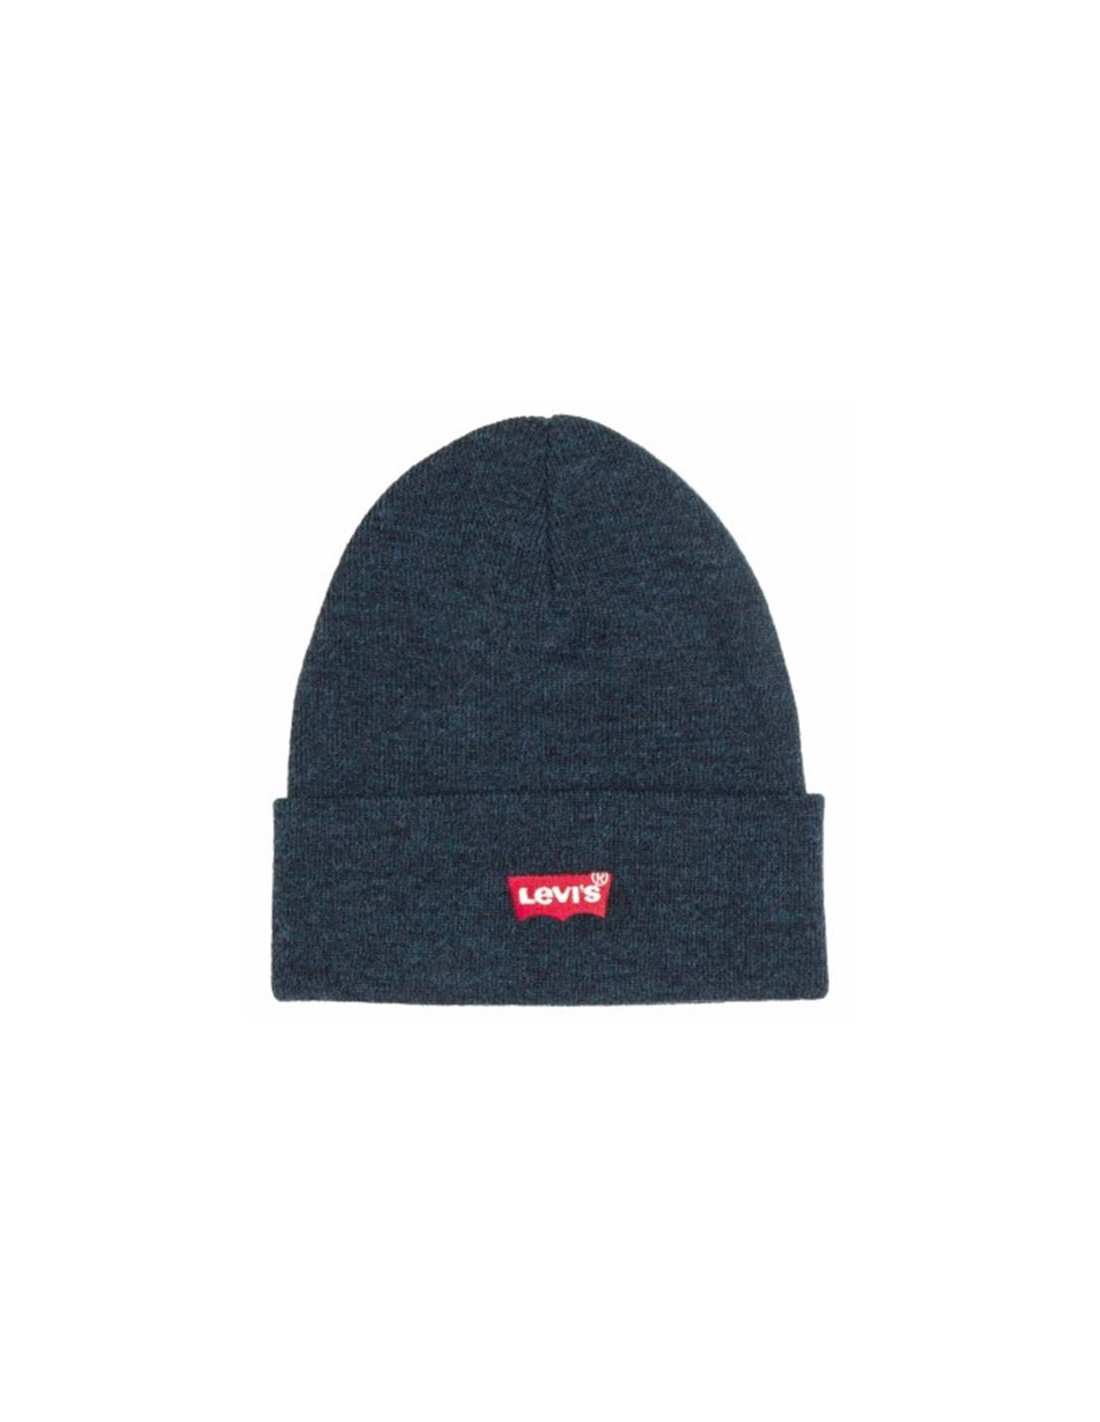 Gorro levi's red batwing embroidered beanie navy blue